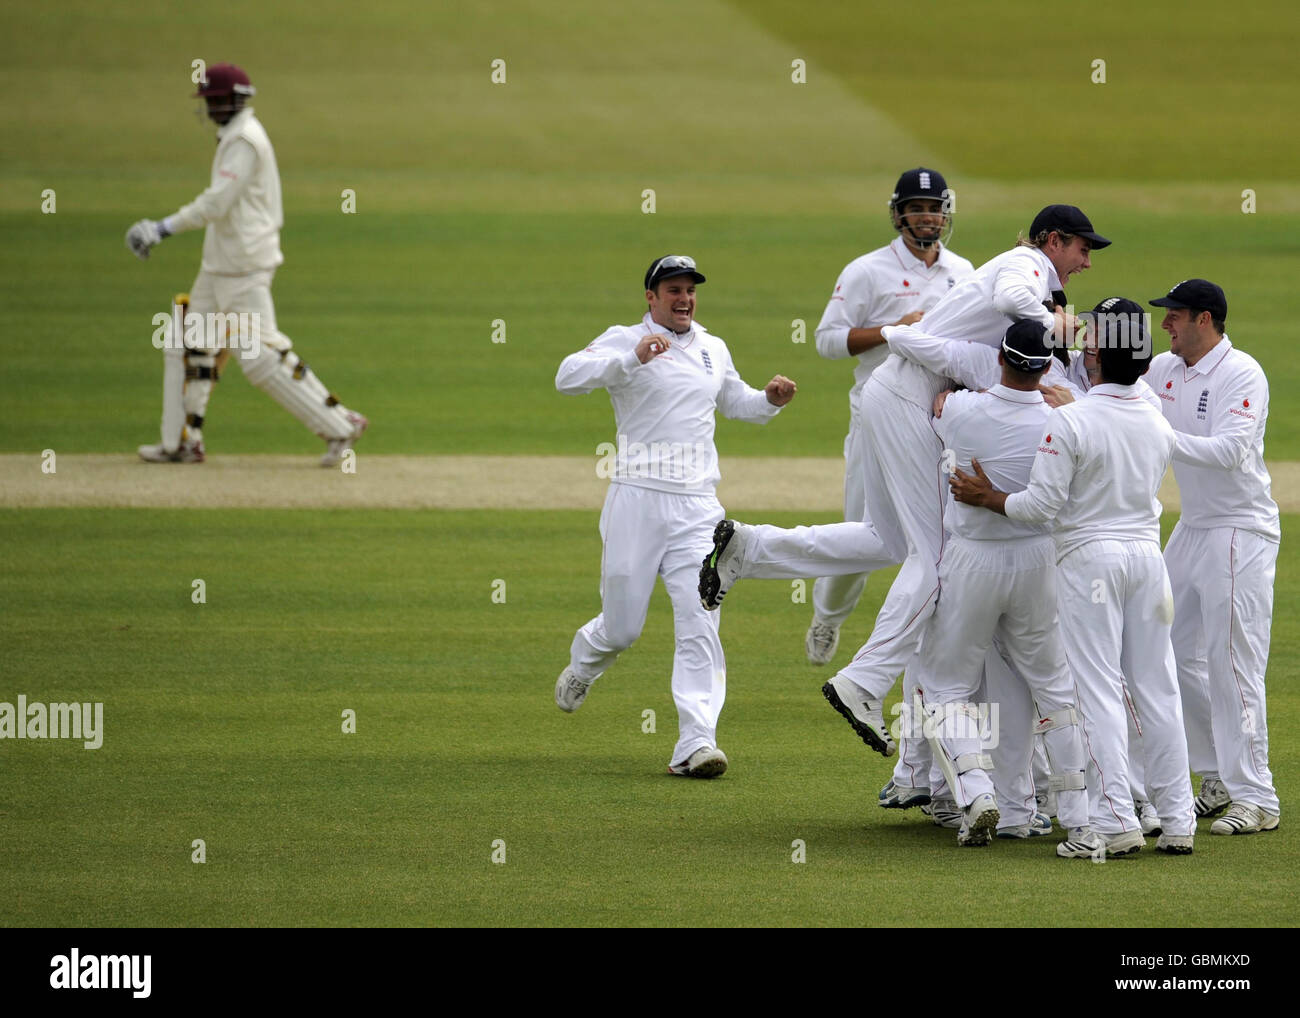 England's Graeme Swann celebrates with teammates after taking the wicket of Shivnarine Chanderpaul for a golden duck during the First npower Test match at Lord's Cricket Ground, London. Stock Photo